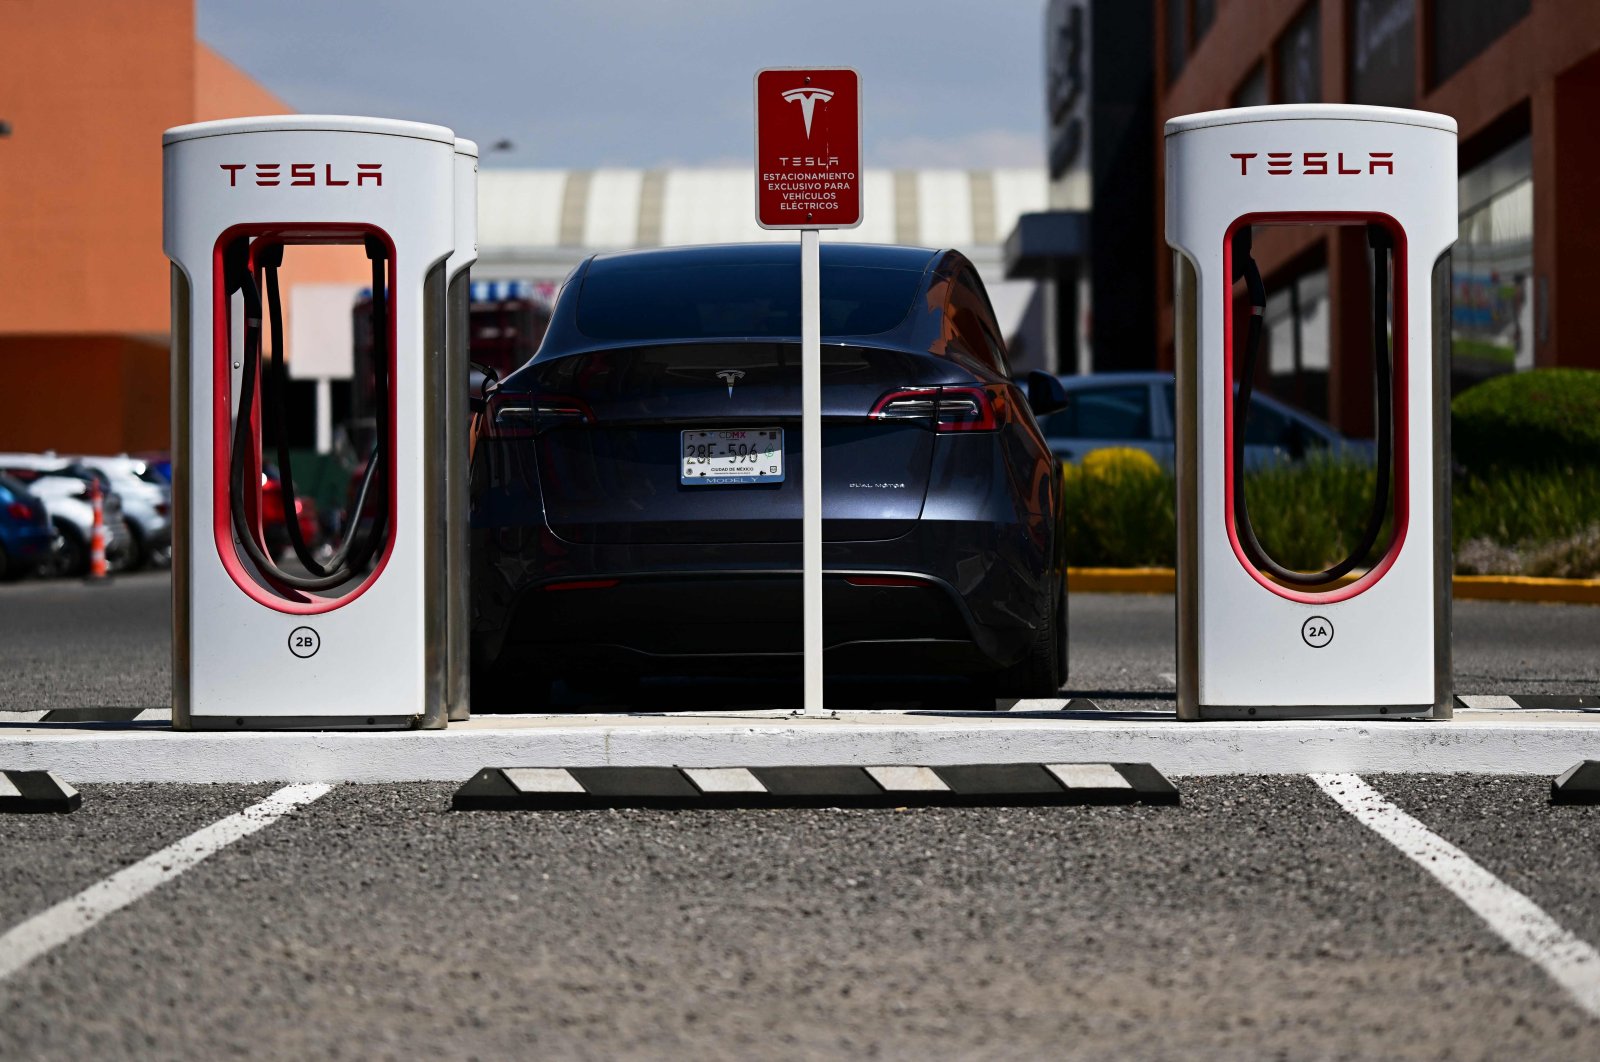 A Tesla charging station for electric cars is seen at the parking lot of a mall in Puebla, Mexico, Feb. 26, 2023. (AFP Photo)